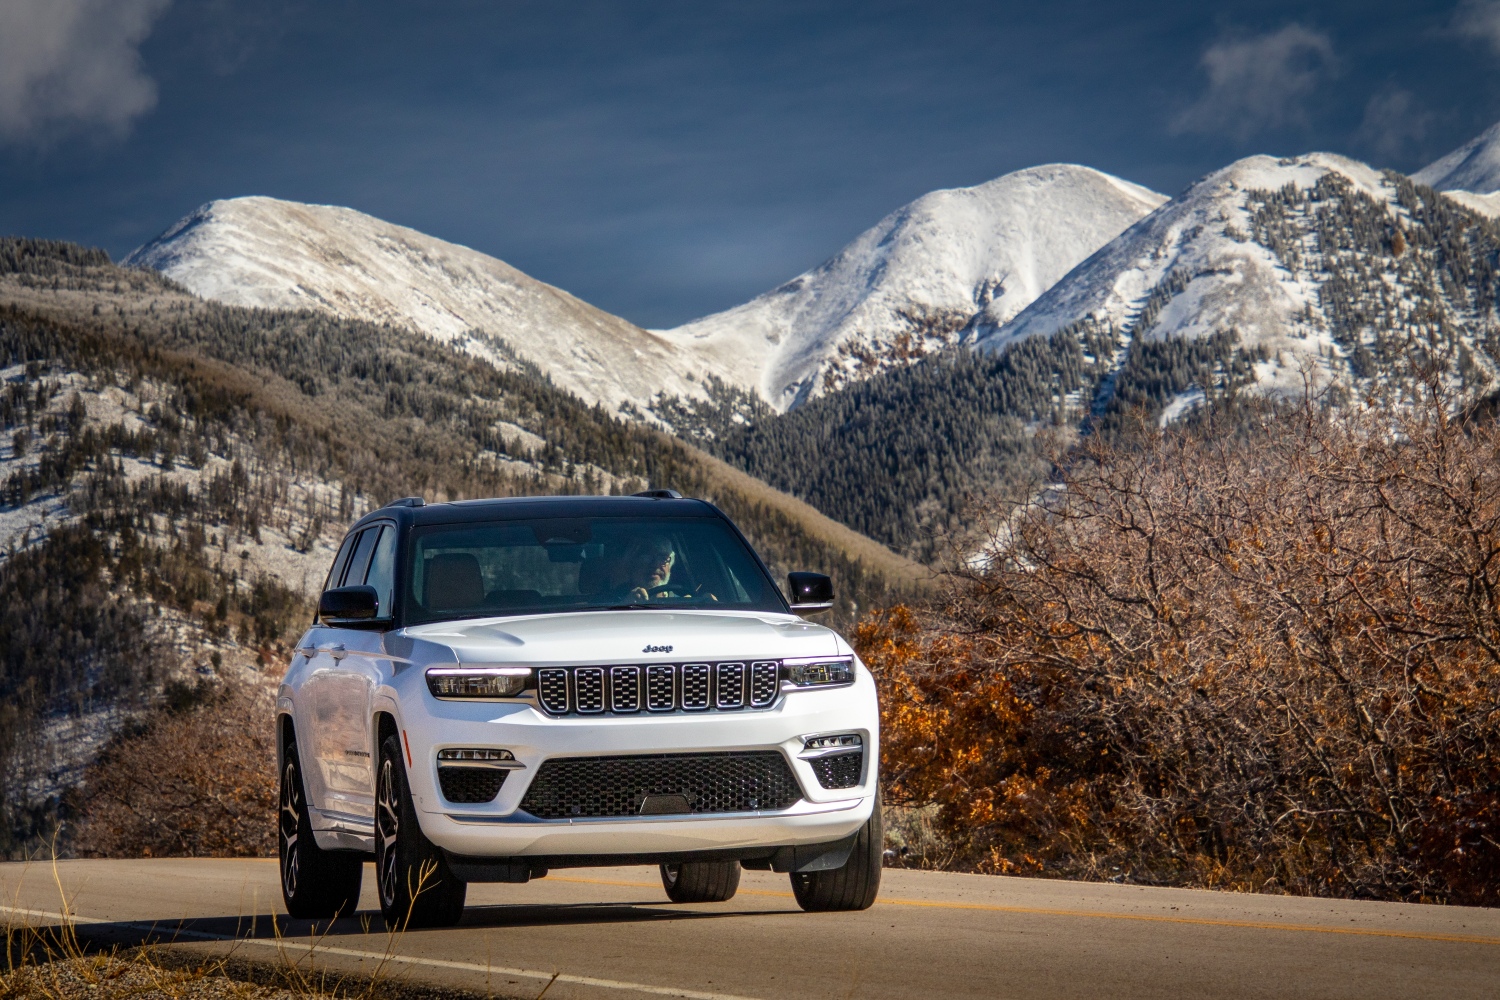 The best all-wheel drive SUVs include the 2023 Jeep Grand Cherokee